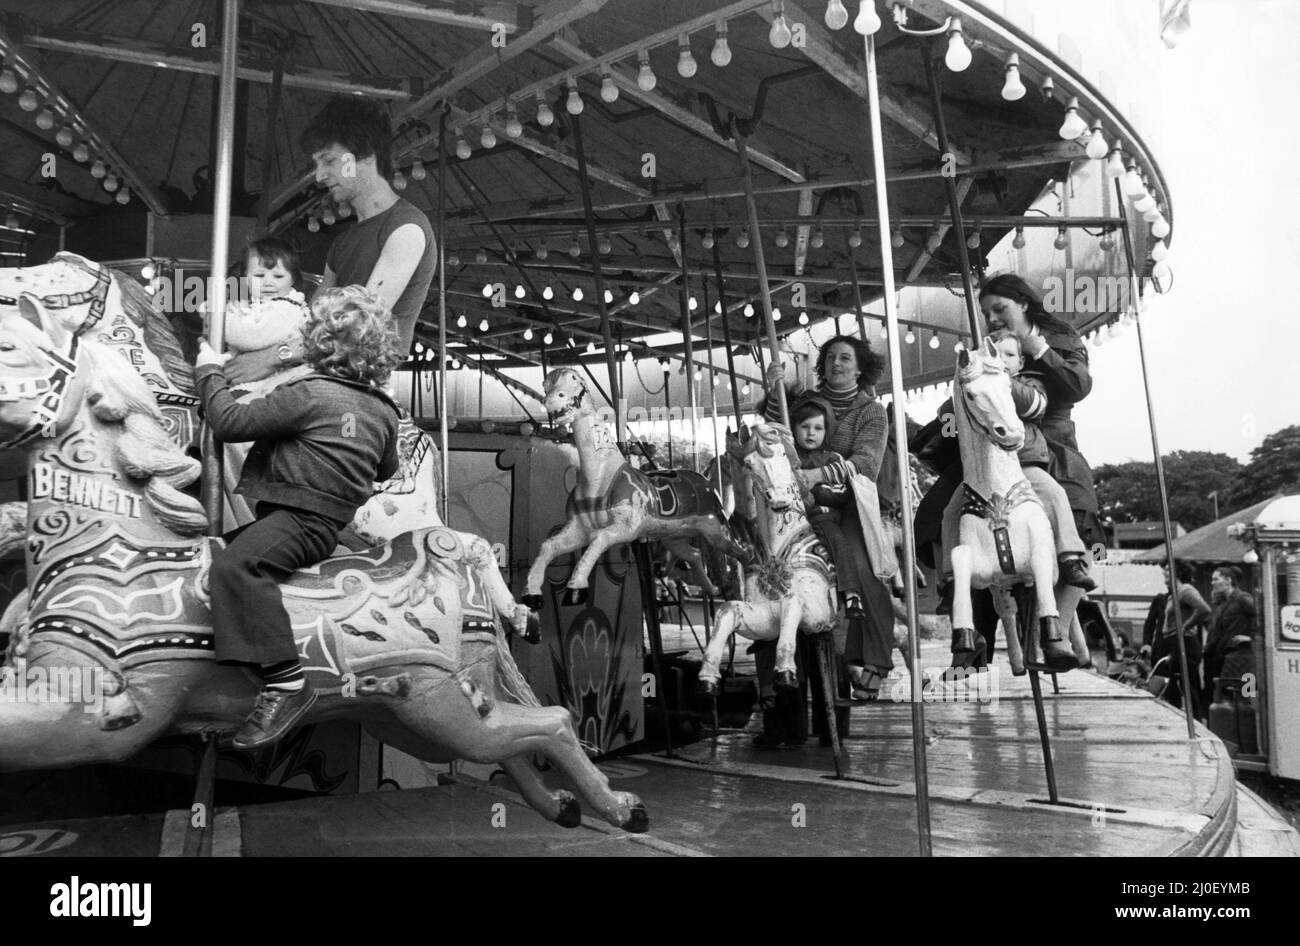 The Hoppings fair, held on the Town Moor in Newcastle upon Tyne, Tyne and Wear. 28th June 1978. Stock Photo